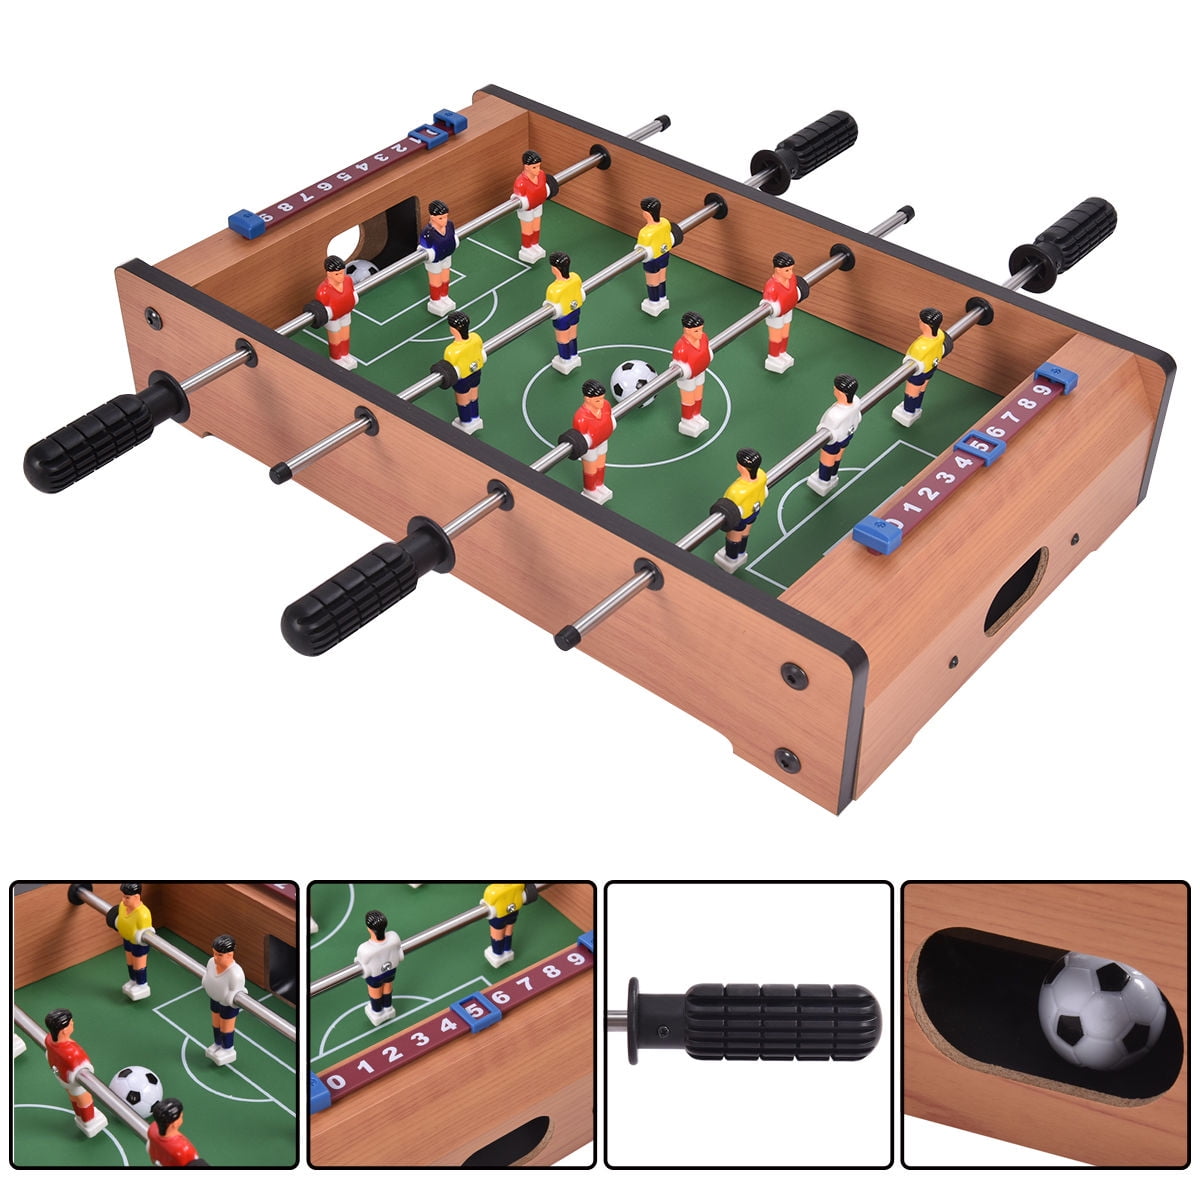 Details about   32mm Mini Soccer Table Foosball Ball Football Indoor Entertainment Game U7H5 